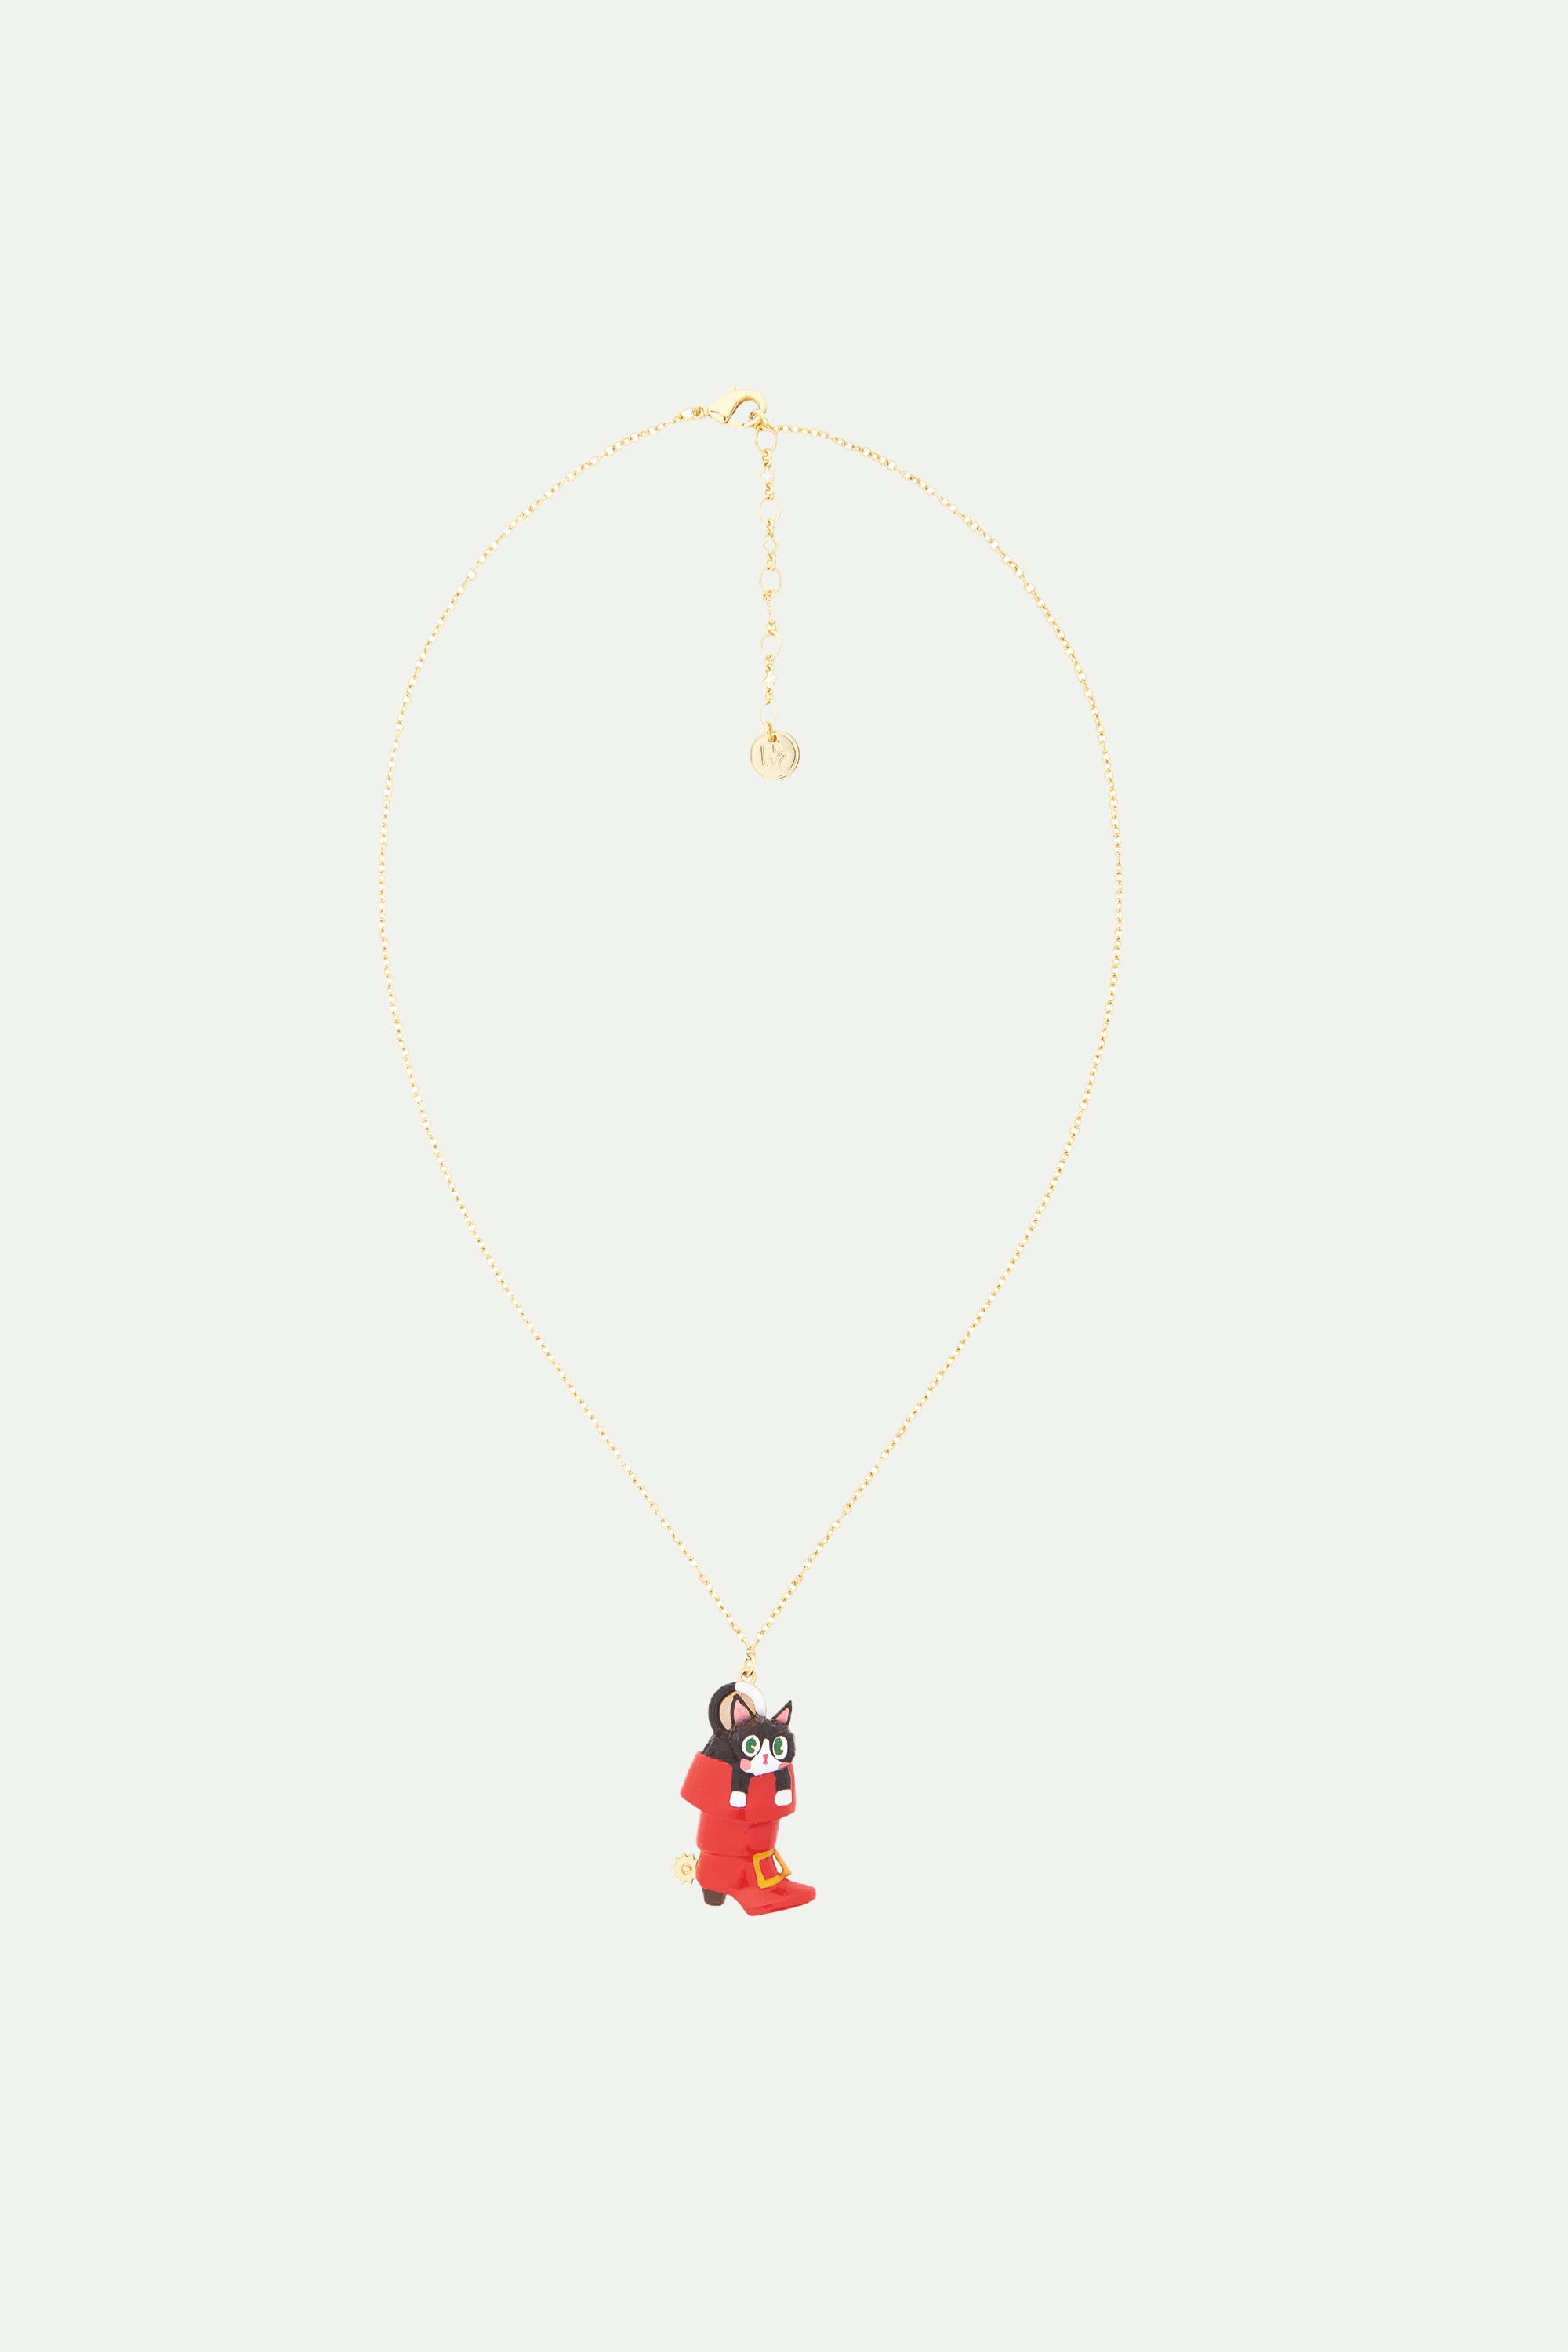 Charming cat in a red boot pendant necklace